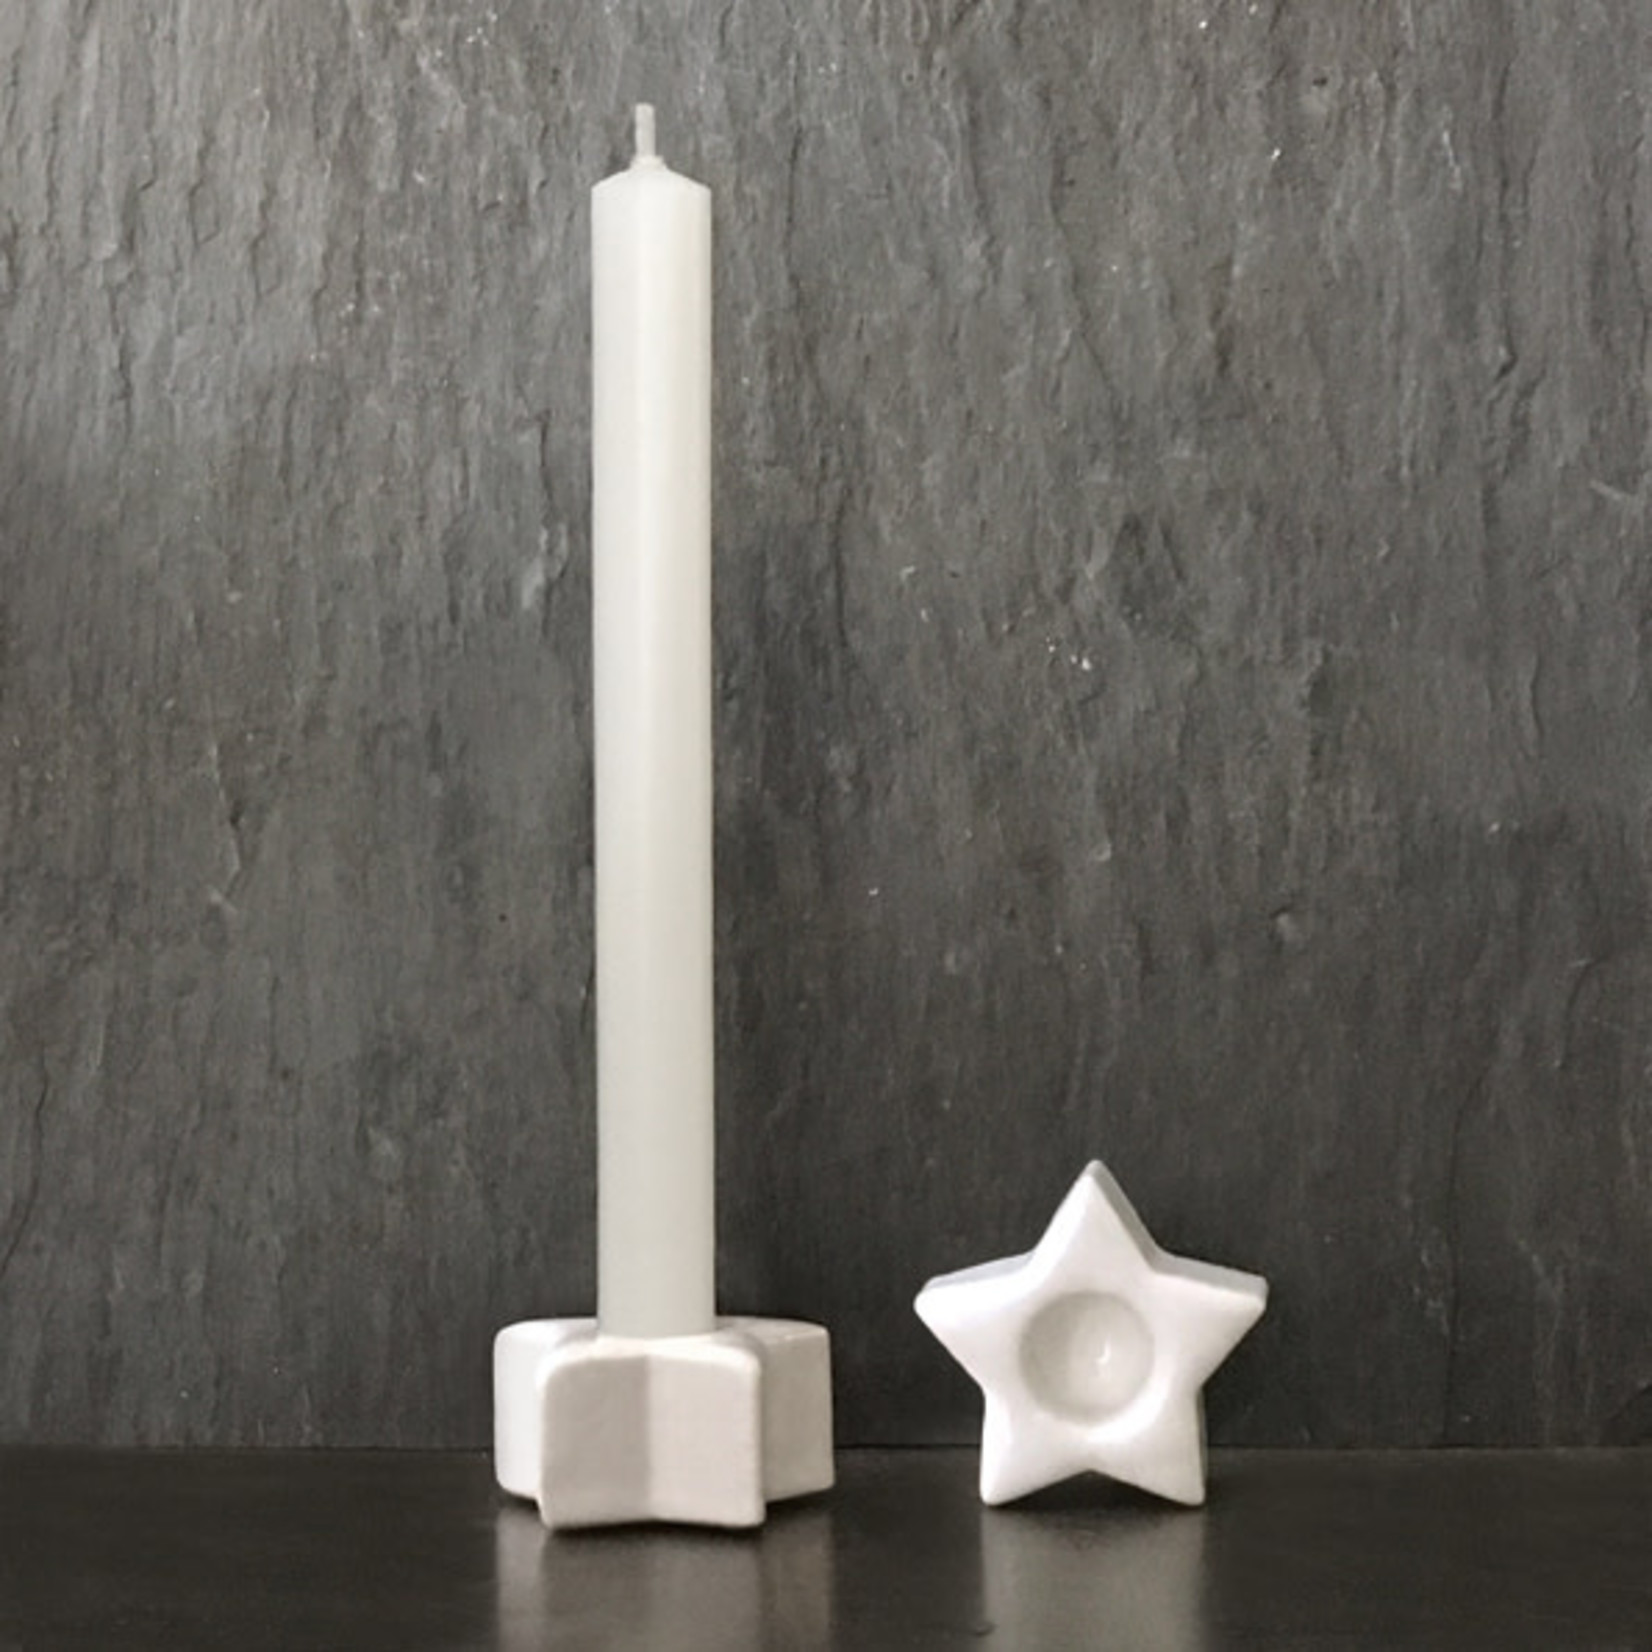 East of India Candle with Star holder